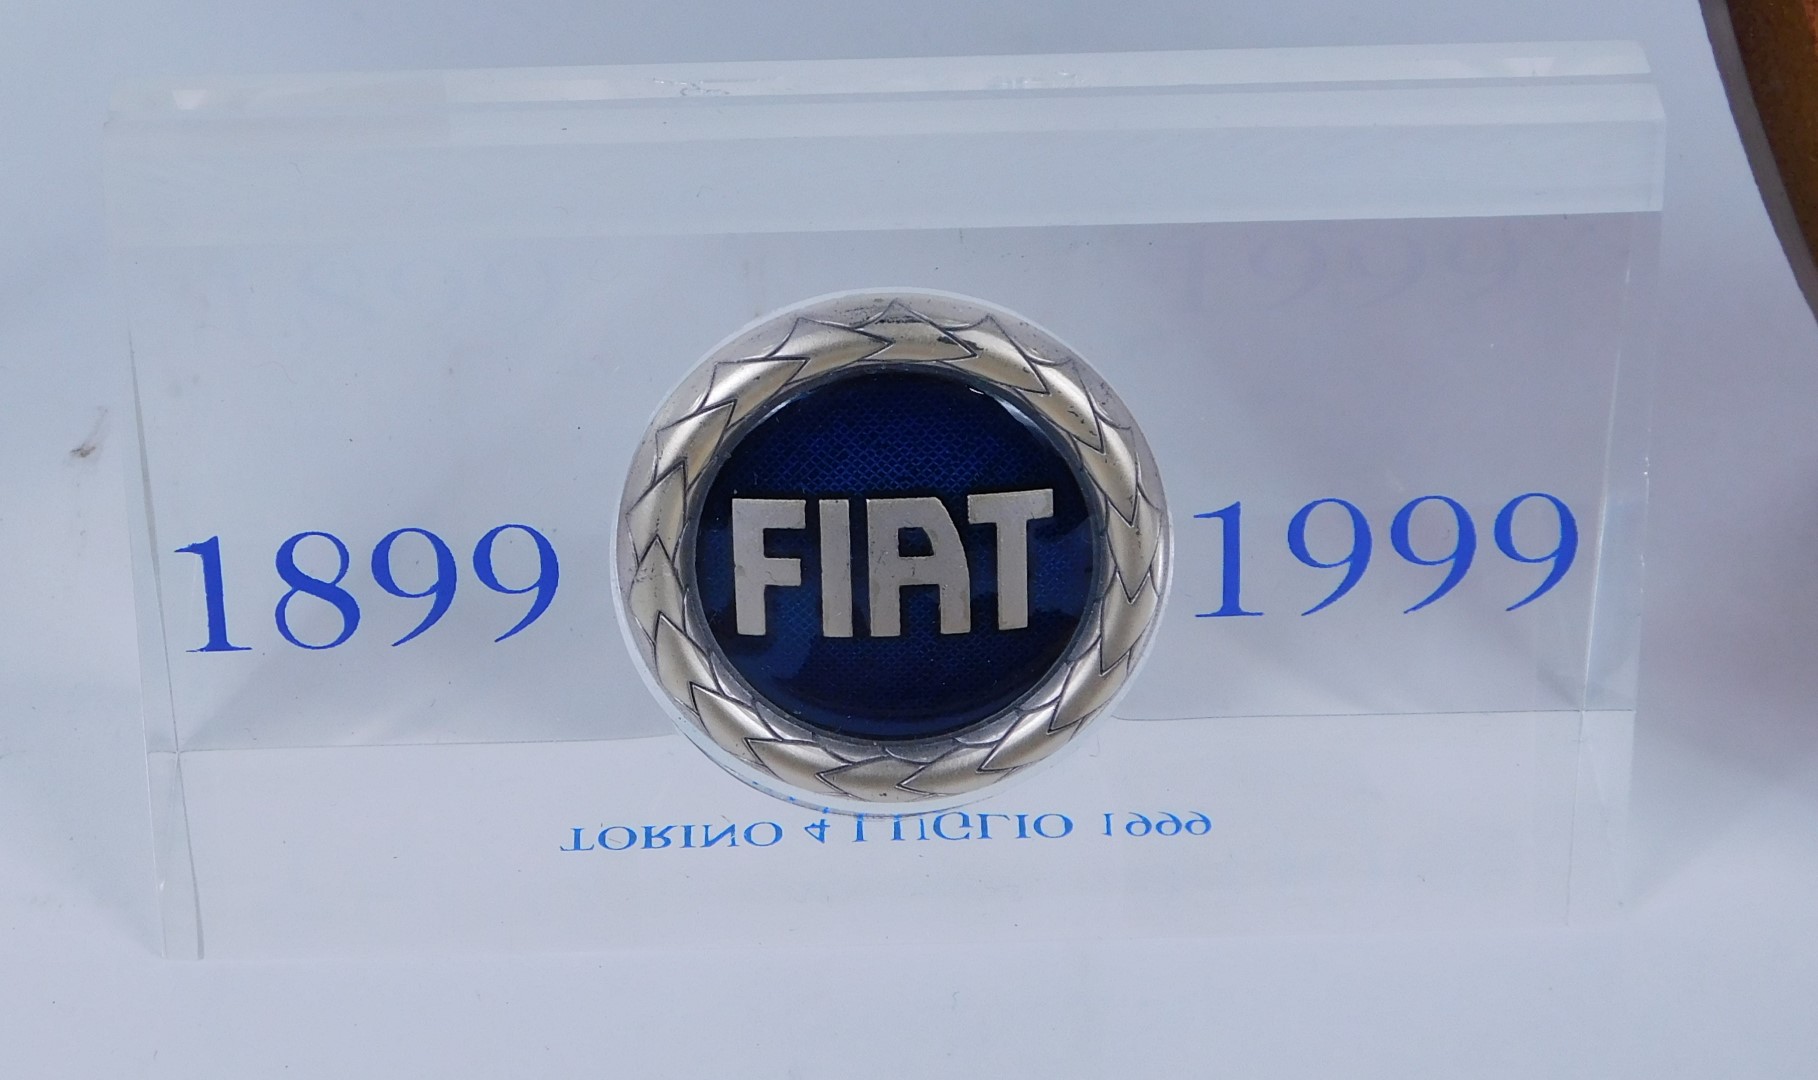 A collection of Fiat collectables, comprising a Fiat ashtray, a Fiat 1899-1999 paperweight, and a Cl - Image 3 of 4